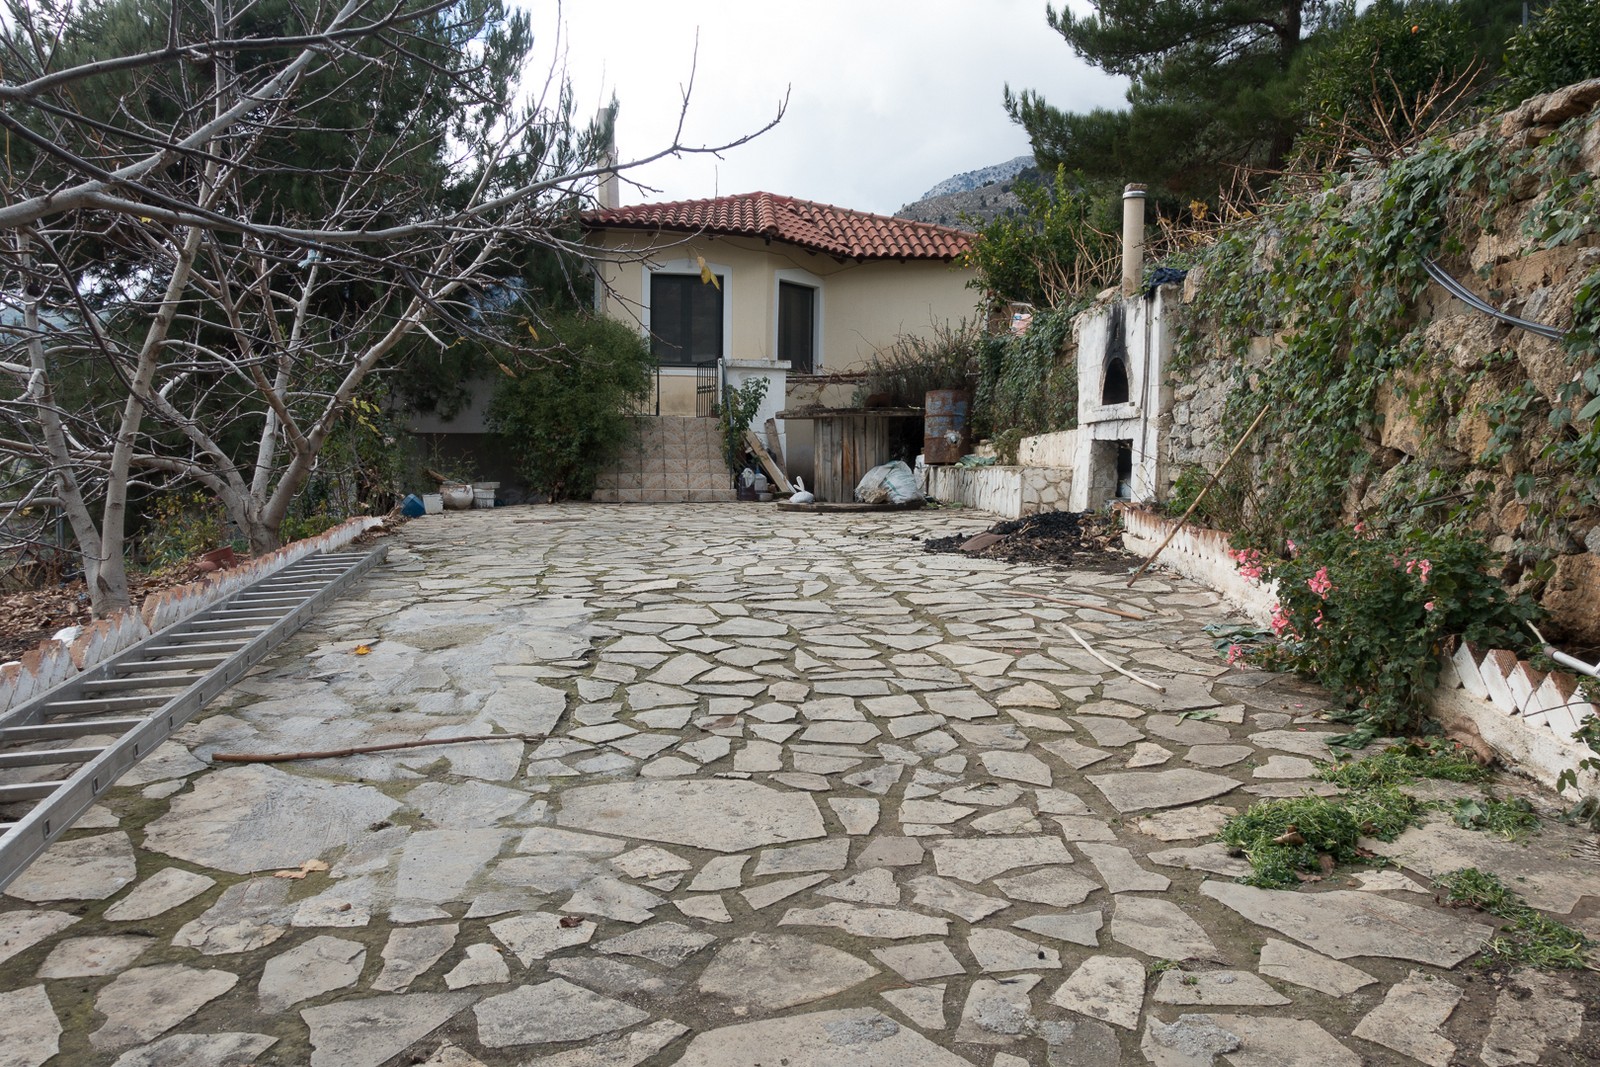 Excellent Detached House 120μ2. with a warehouse of 80μ2 on a plot of 1.300m2.